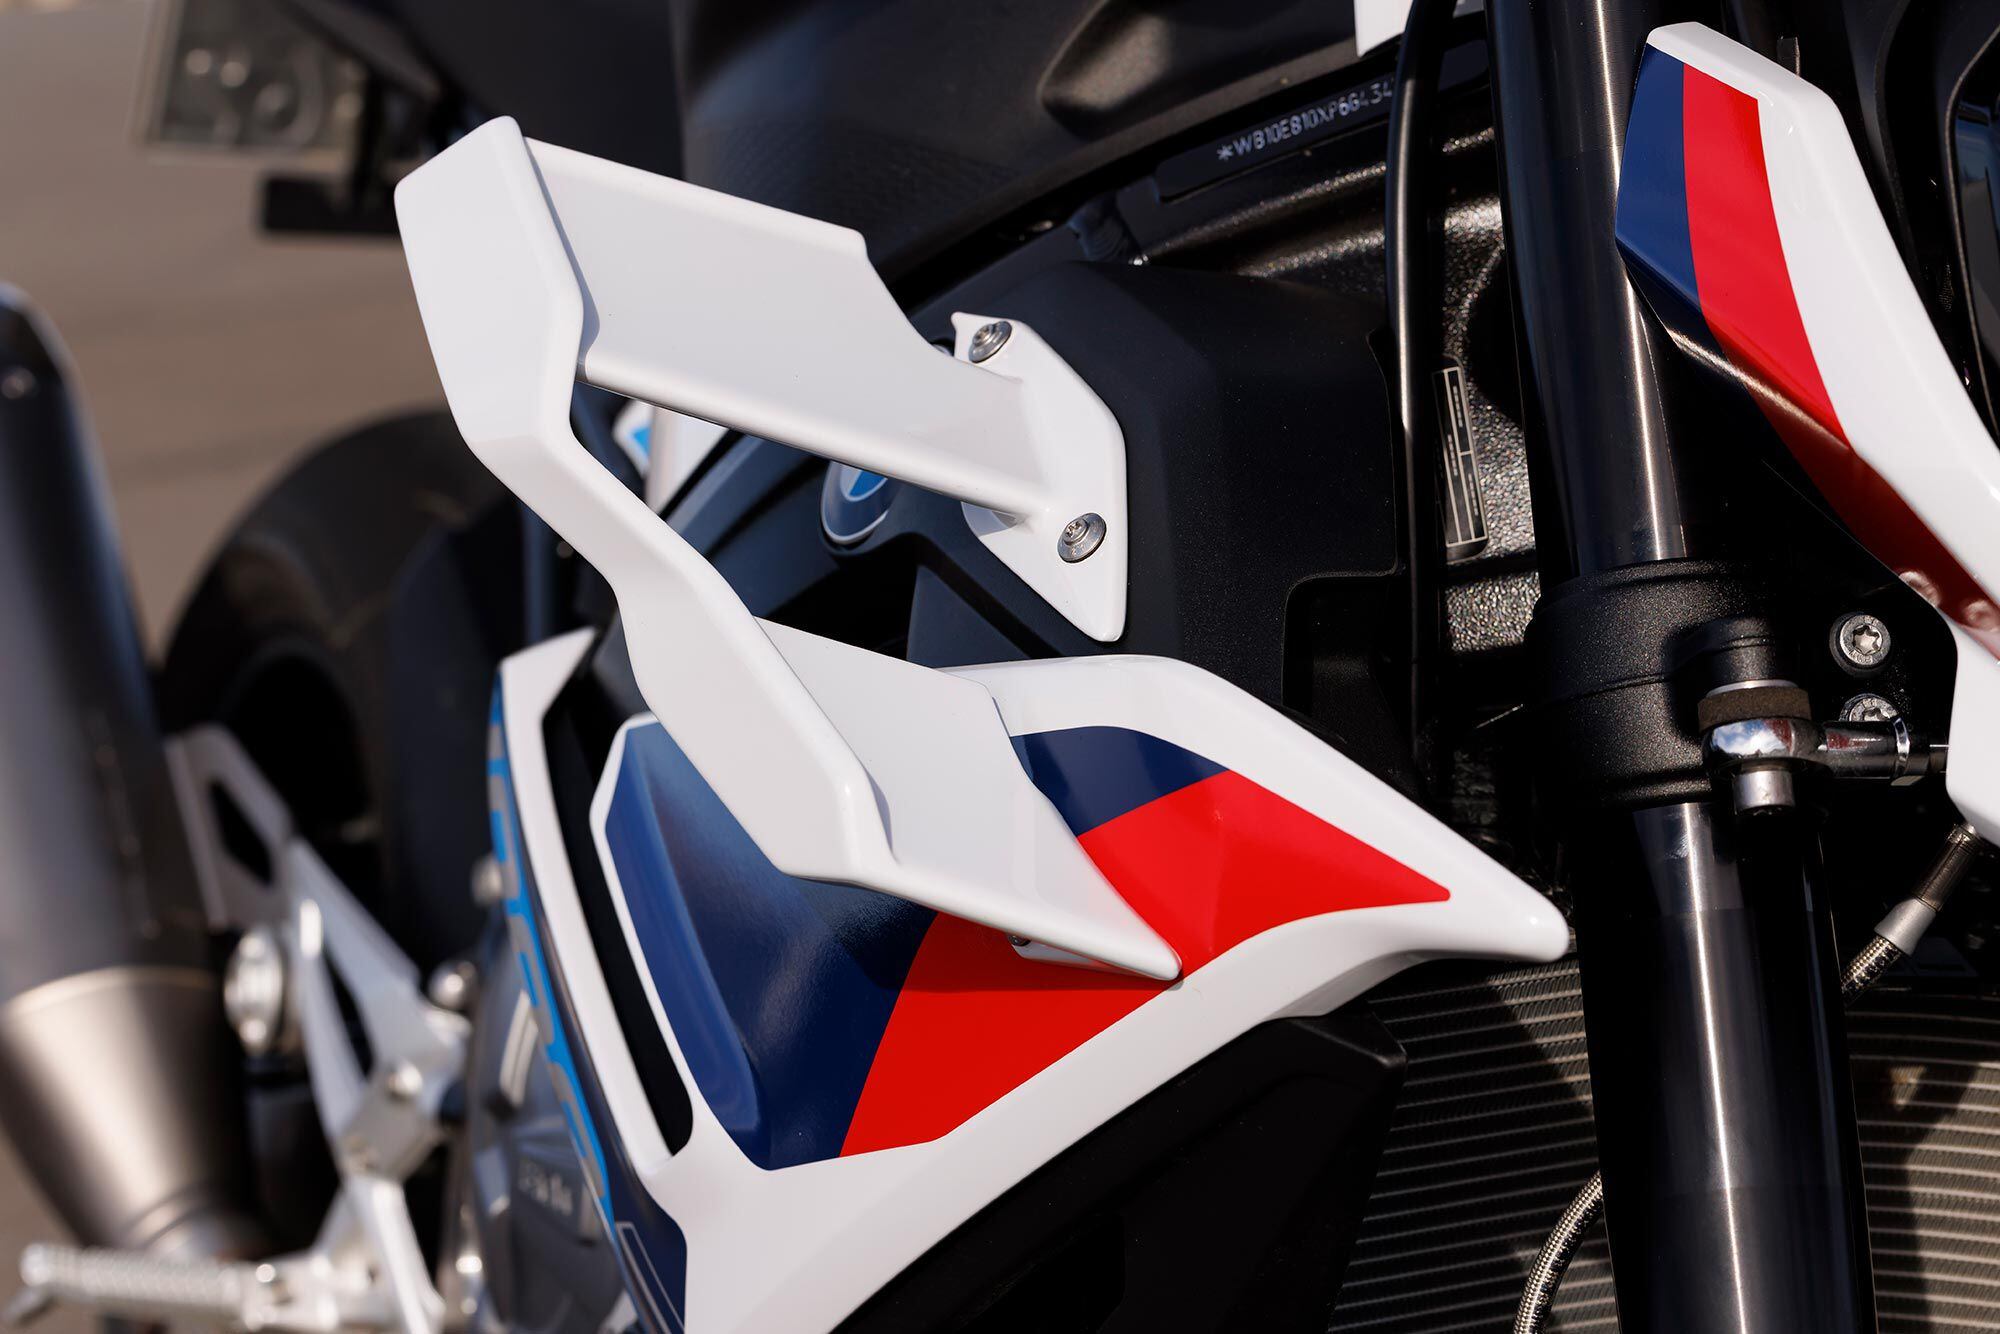 The winglets on the M 1000 R generate 22 pounds of downforce at 136 mph, which gave BMW the confidence to unleash the inline-four’s full 205 hp.